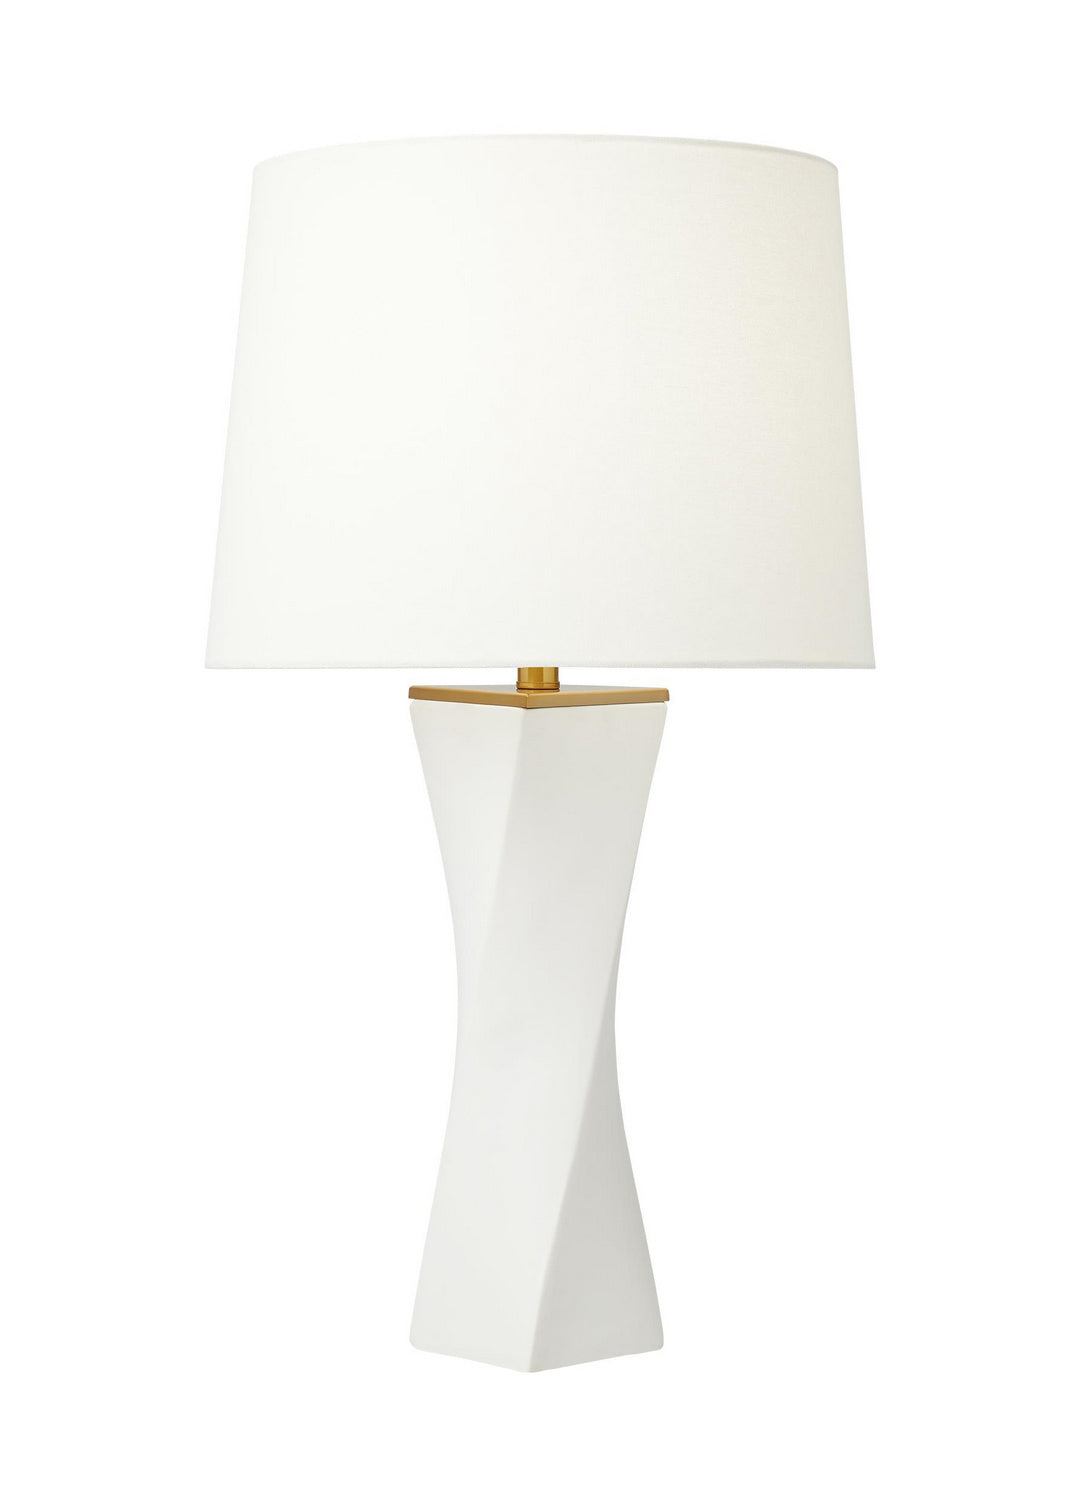 Lagos Light Lamp White Leather by Visual Comfort Studio (CT1211WL1) Lighting & Bulbs Unlimited